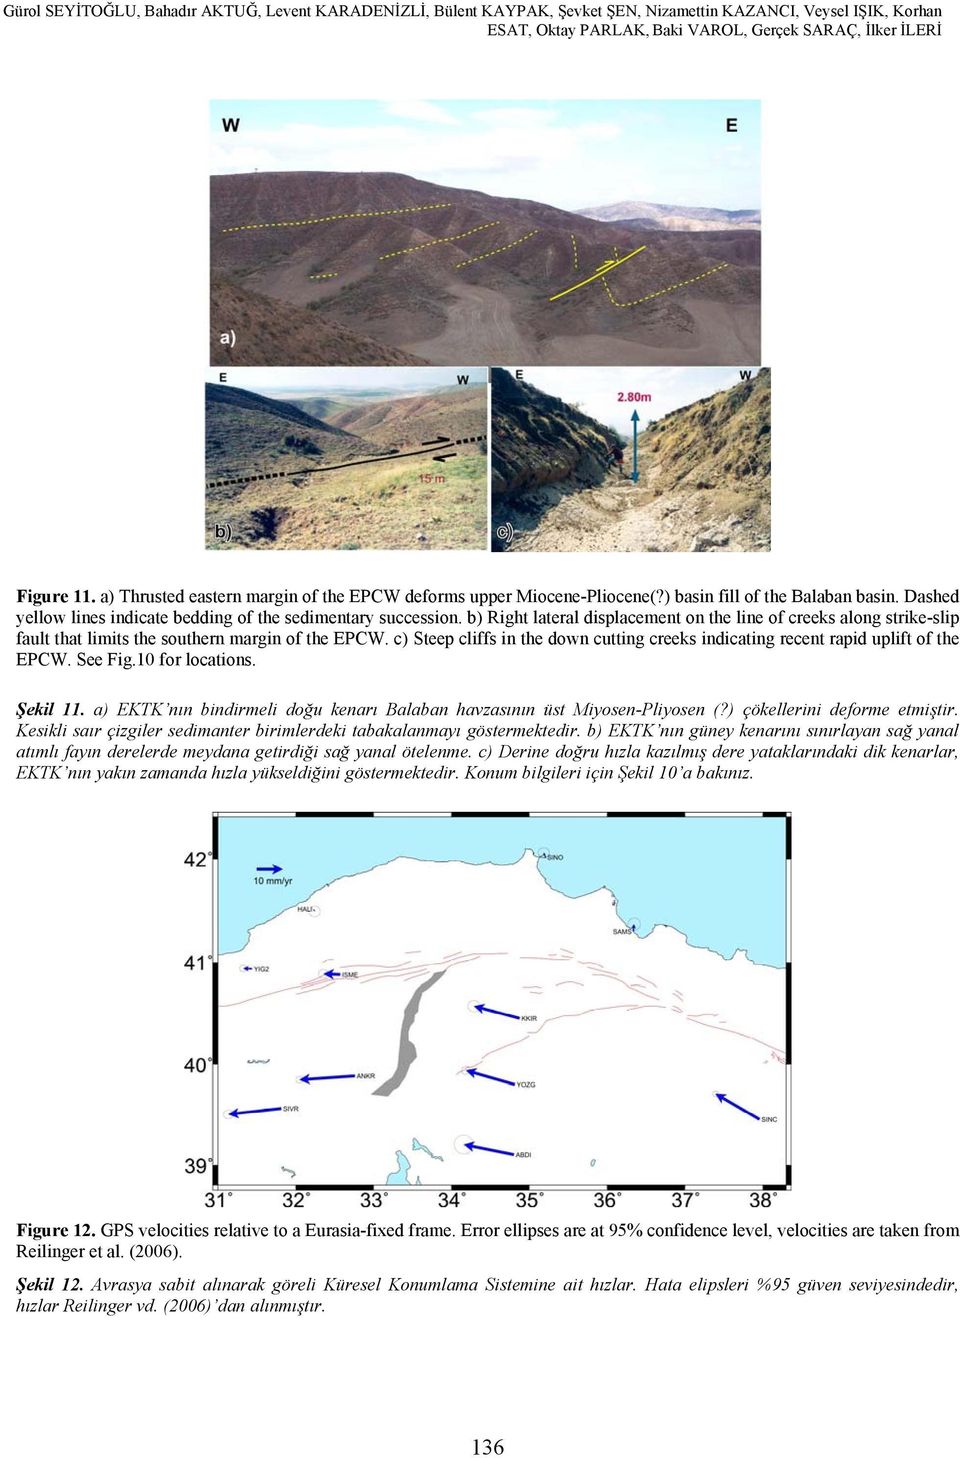 ) basin fill of the Balaban basin. Dashed yellow lines indicate bedding of the sedimentary succession.